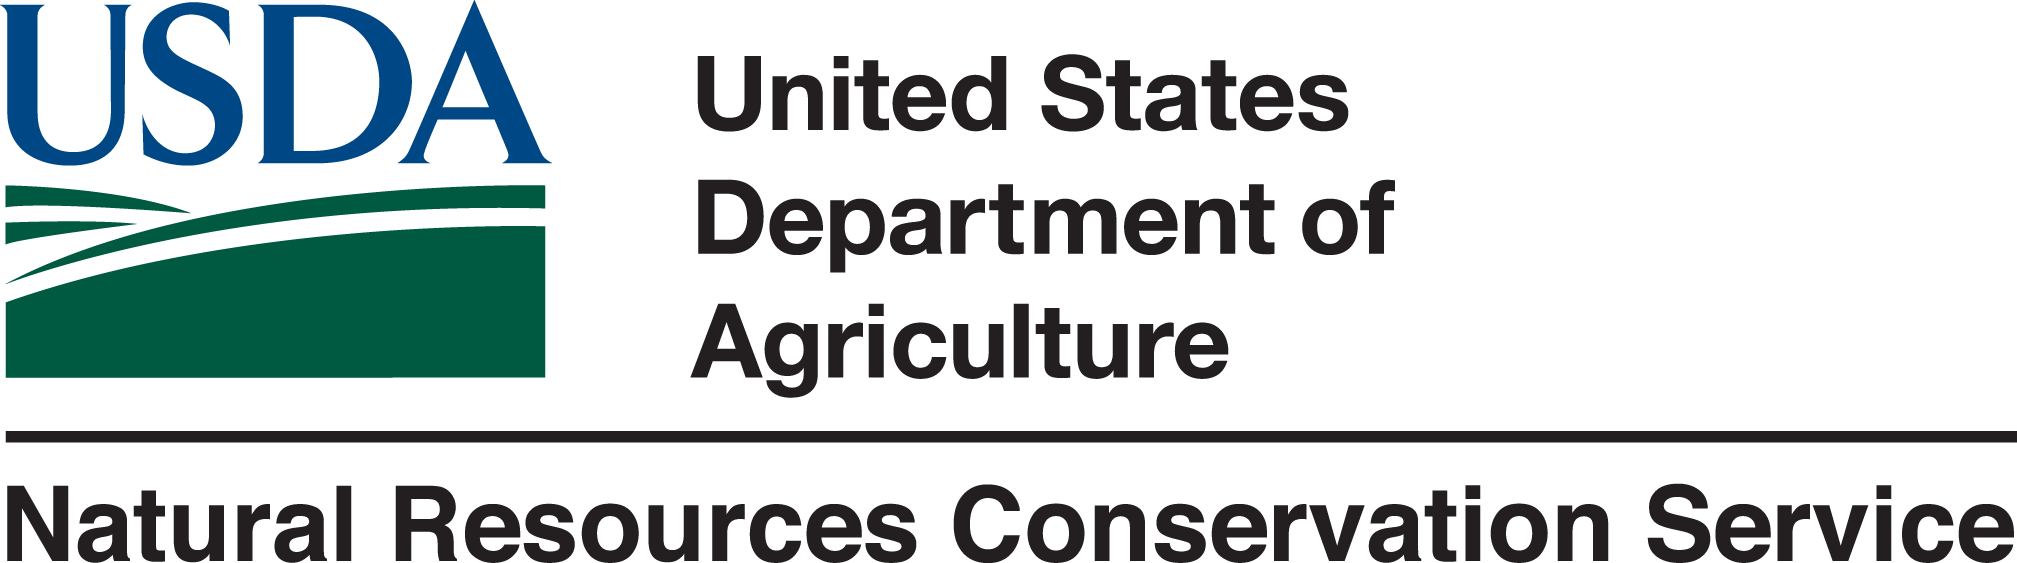 Logo for United States Department of Agriculture Natural Resource Conservation Service.